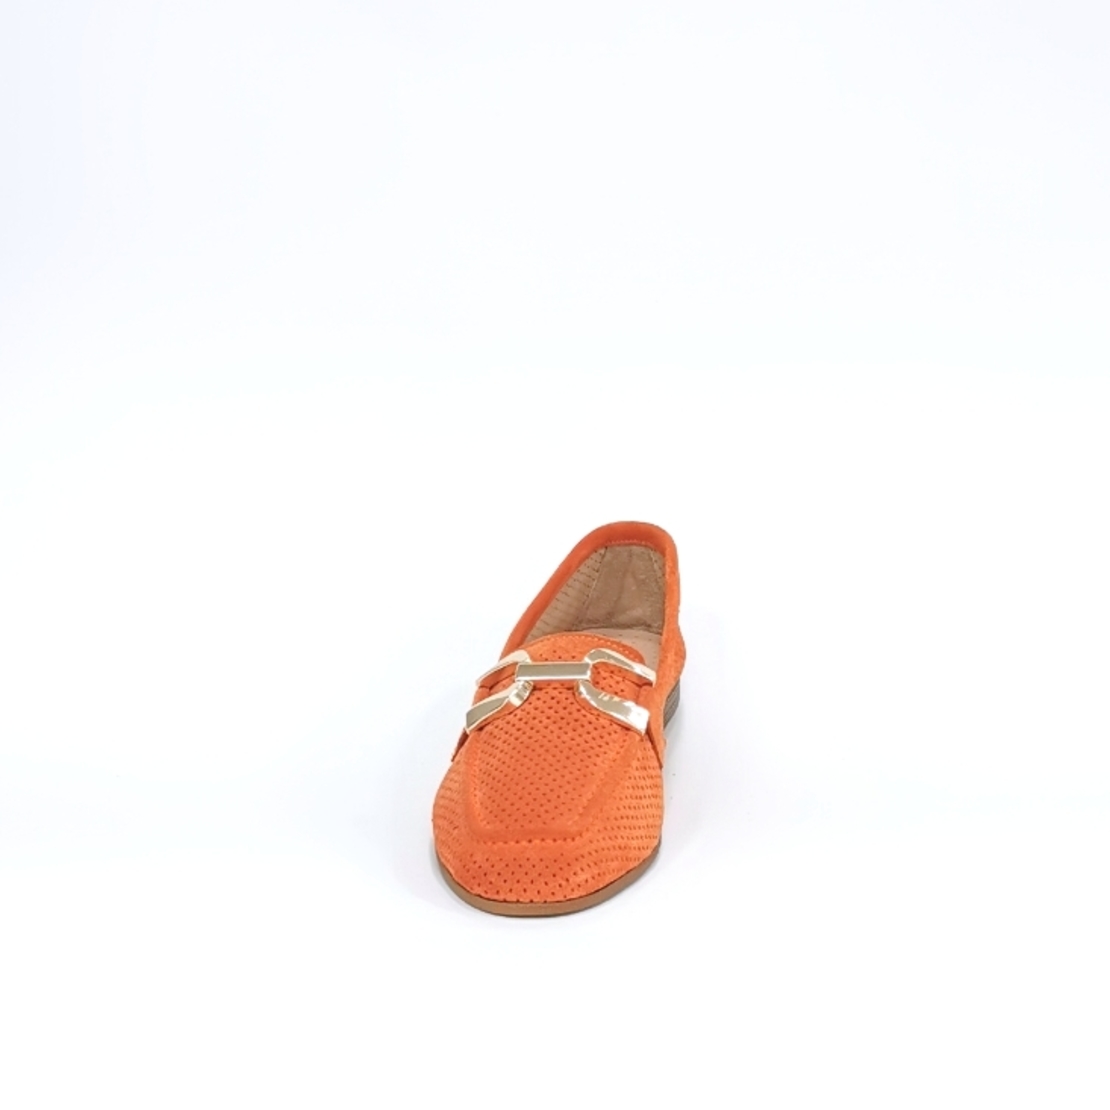 Women's moccasins / loafers / made of natural leather in orange color/7163